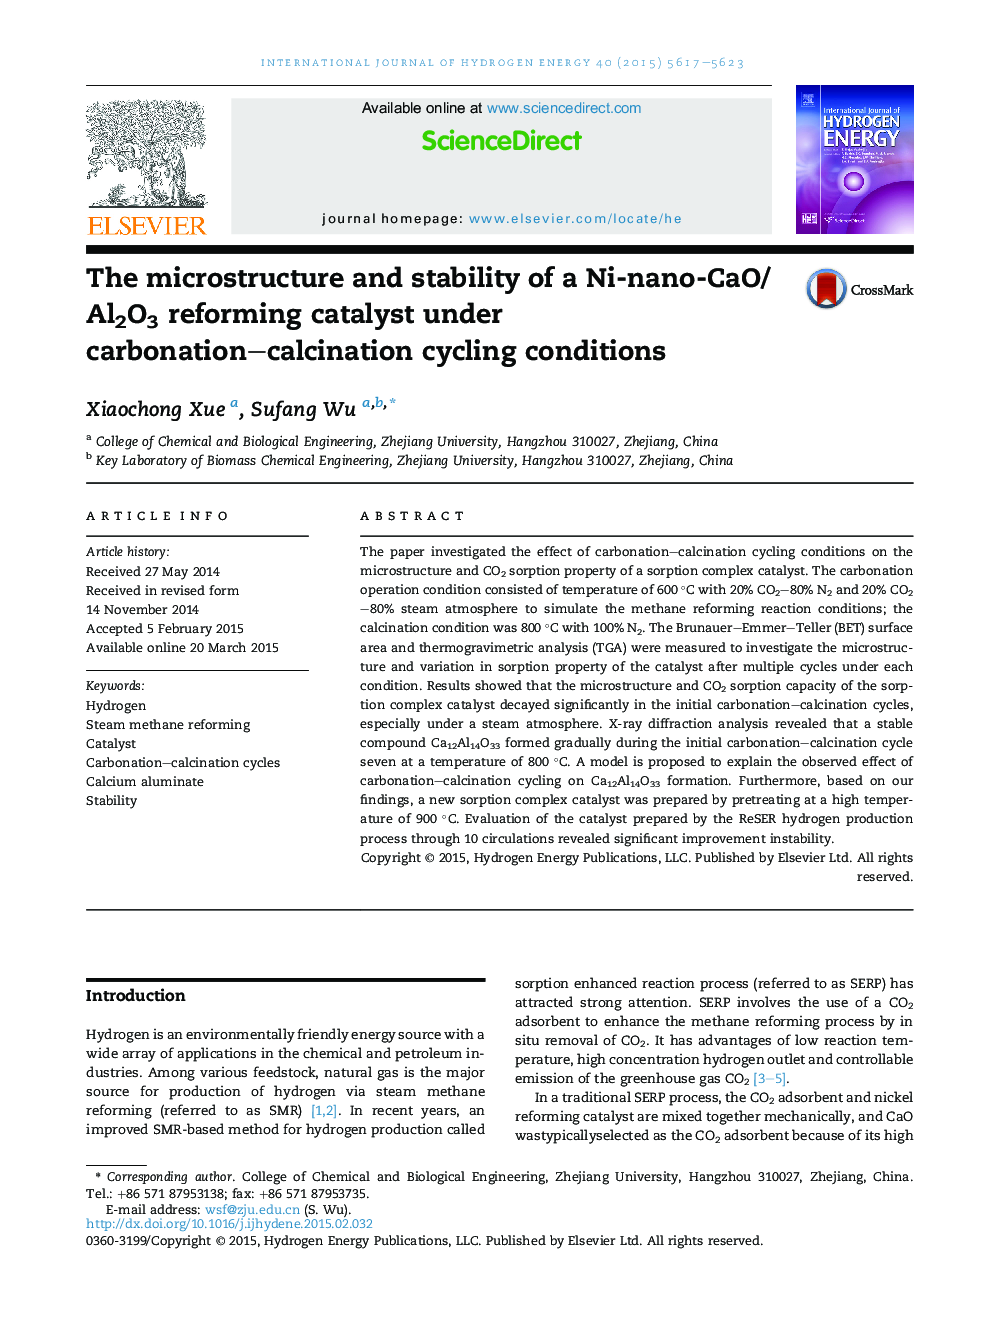 The microstructure and stability of a Ni-nano-CaO/Al2O3 reforming catalyst under carbonation–calcination cycling conditions